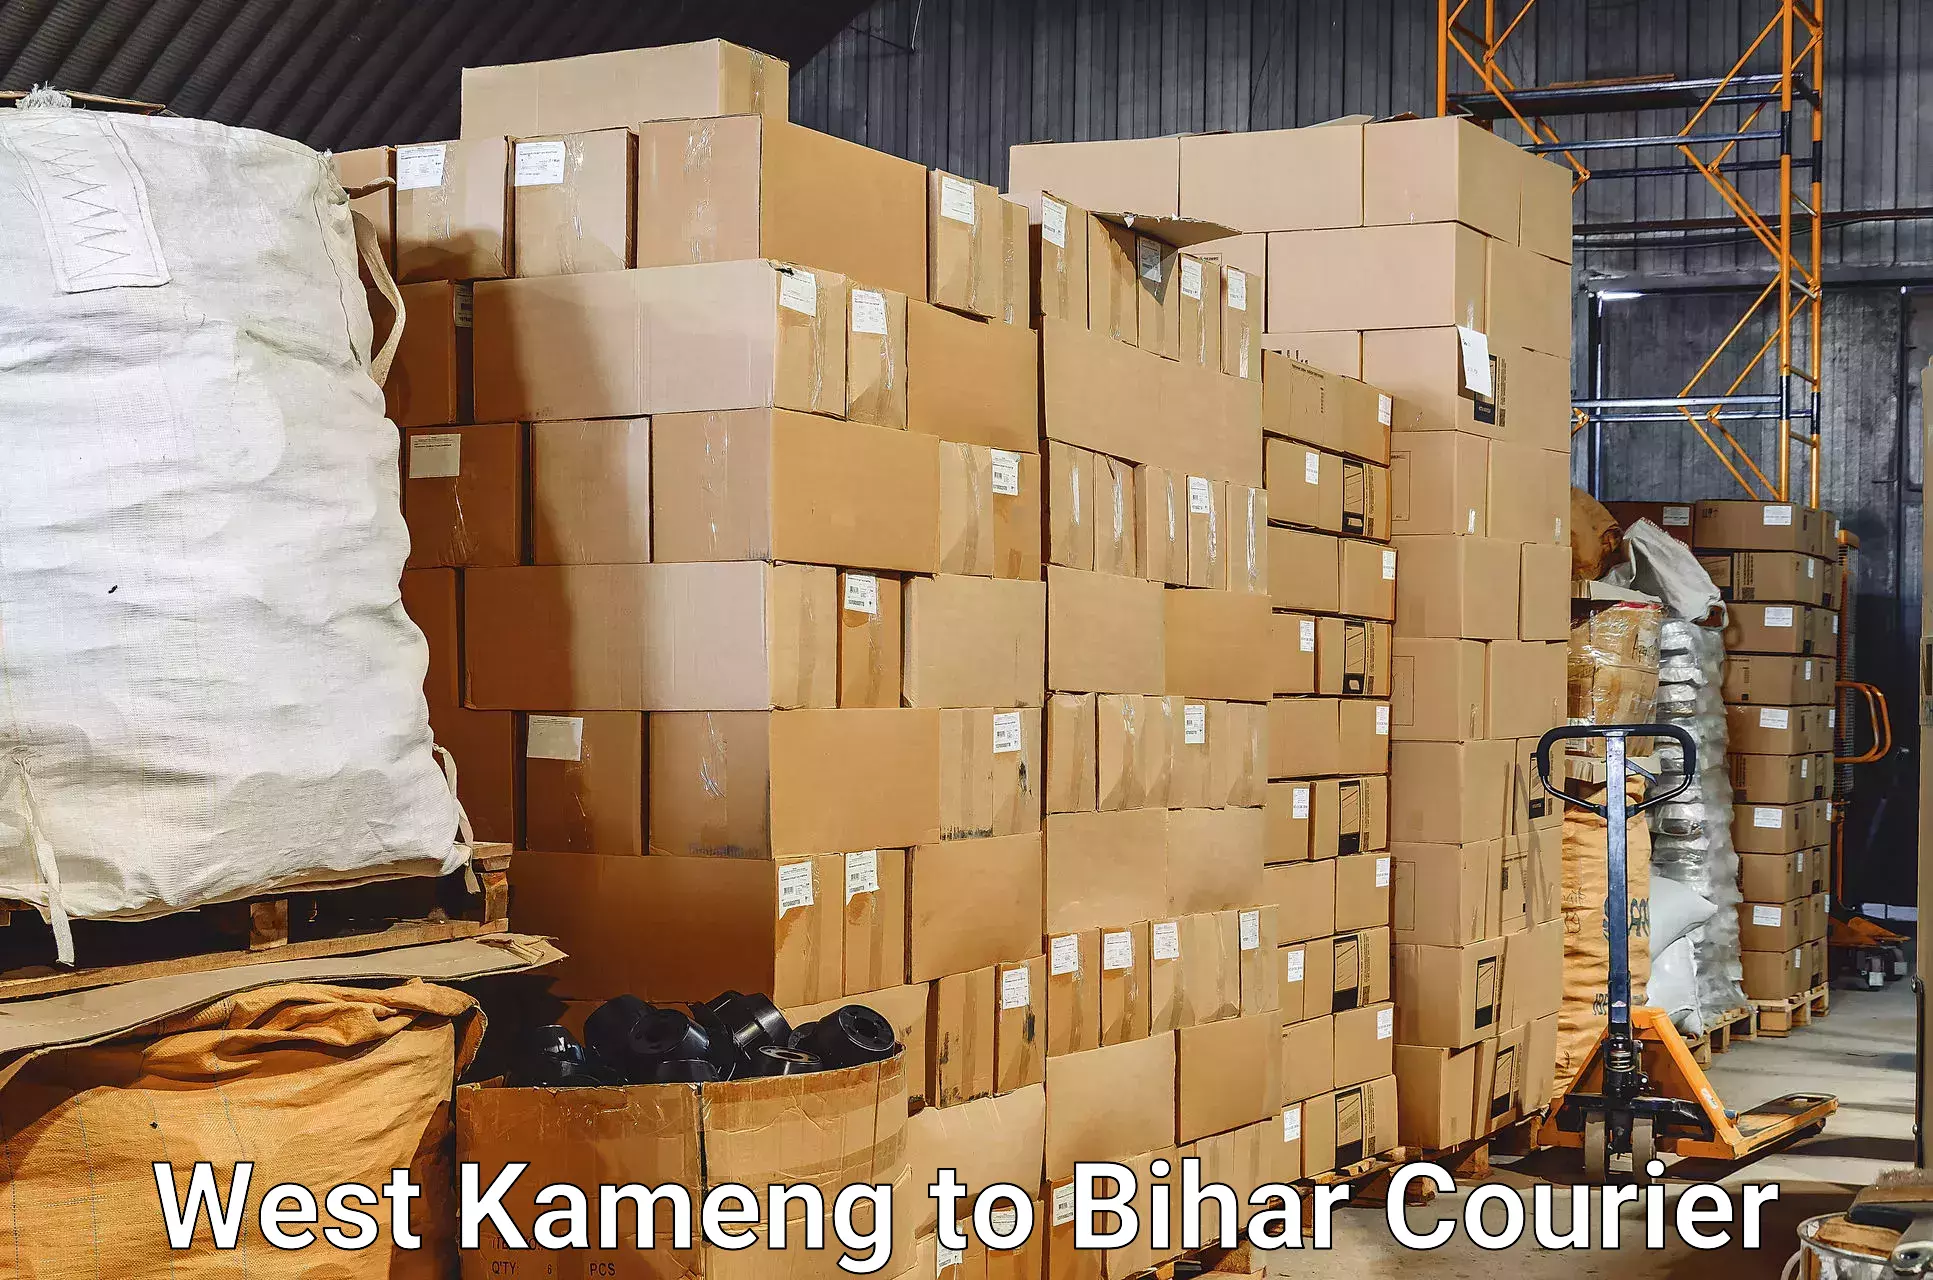 Luggage shipment processing West Kameng to Bankipore